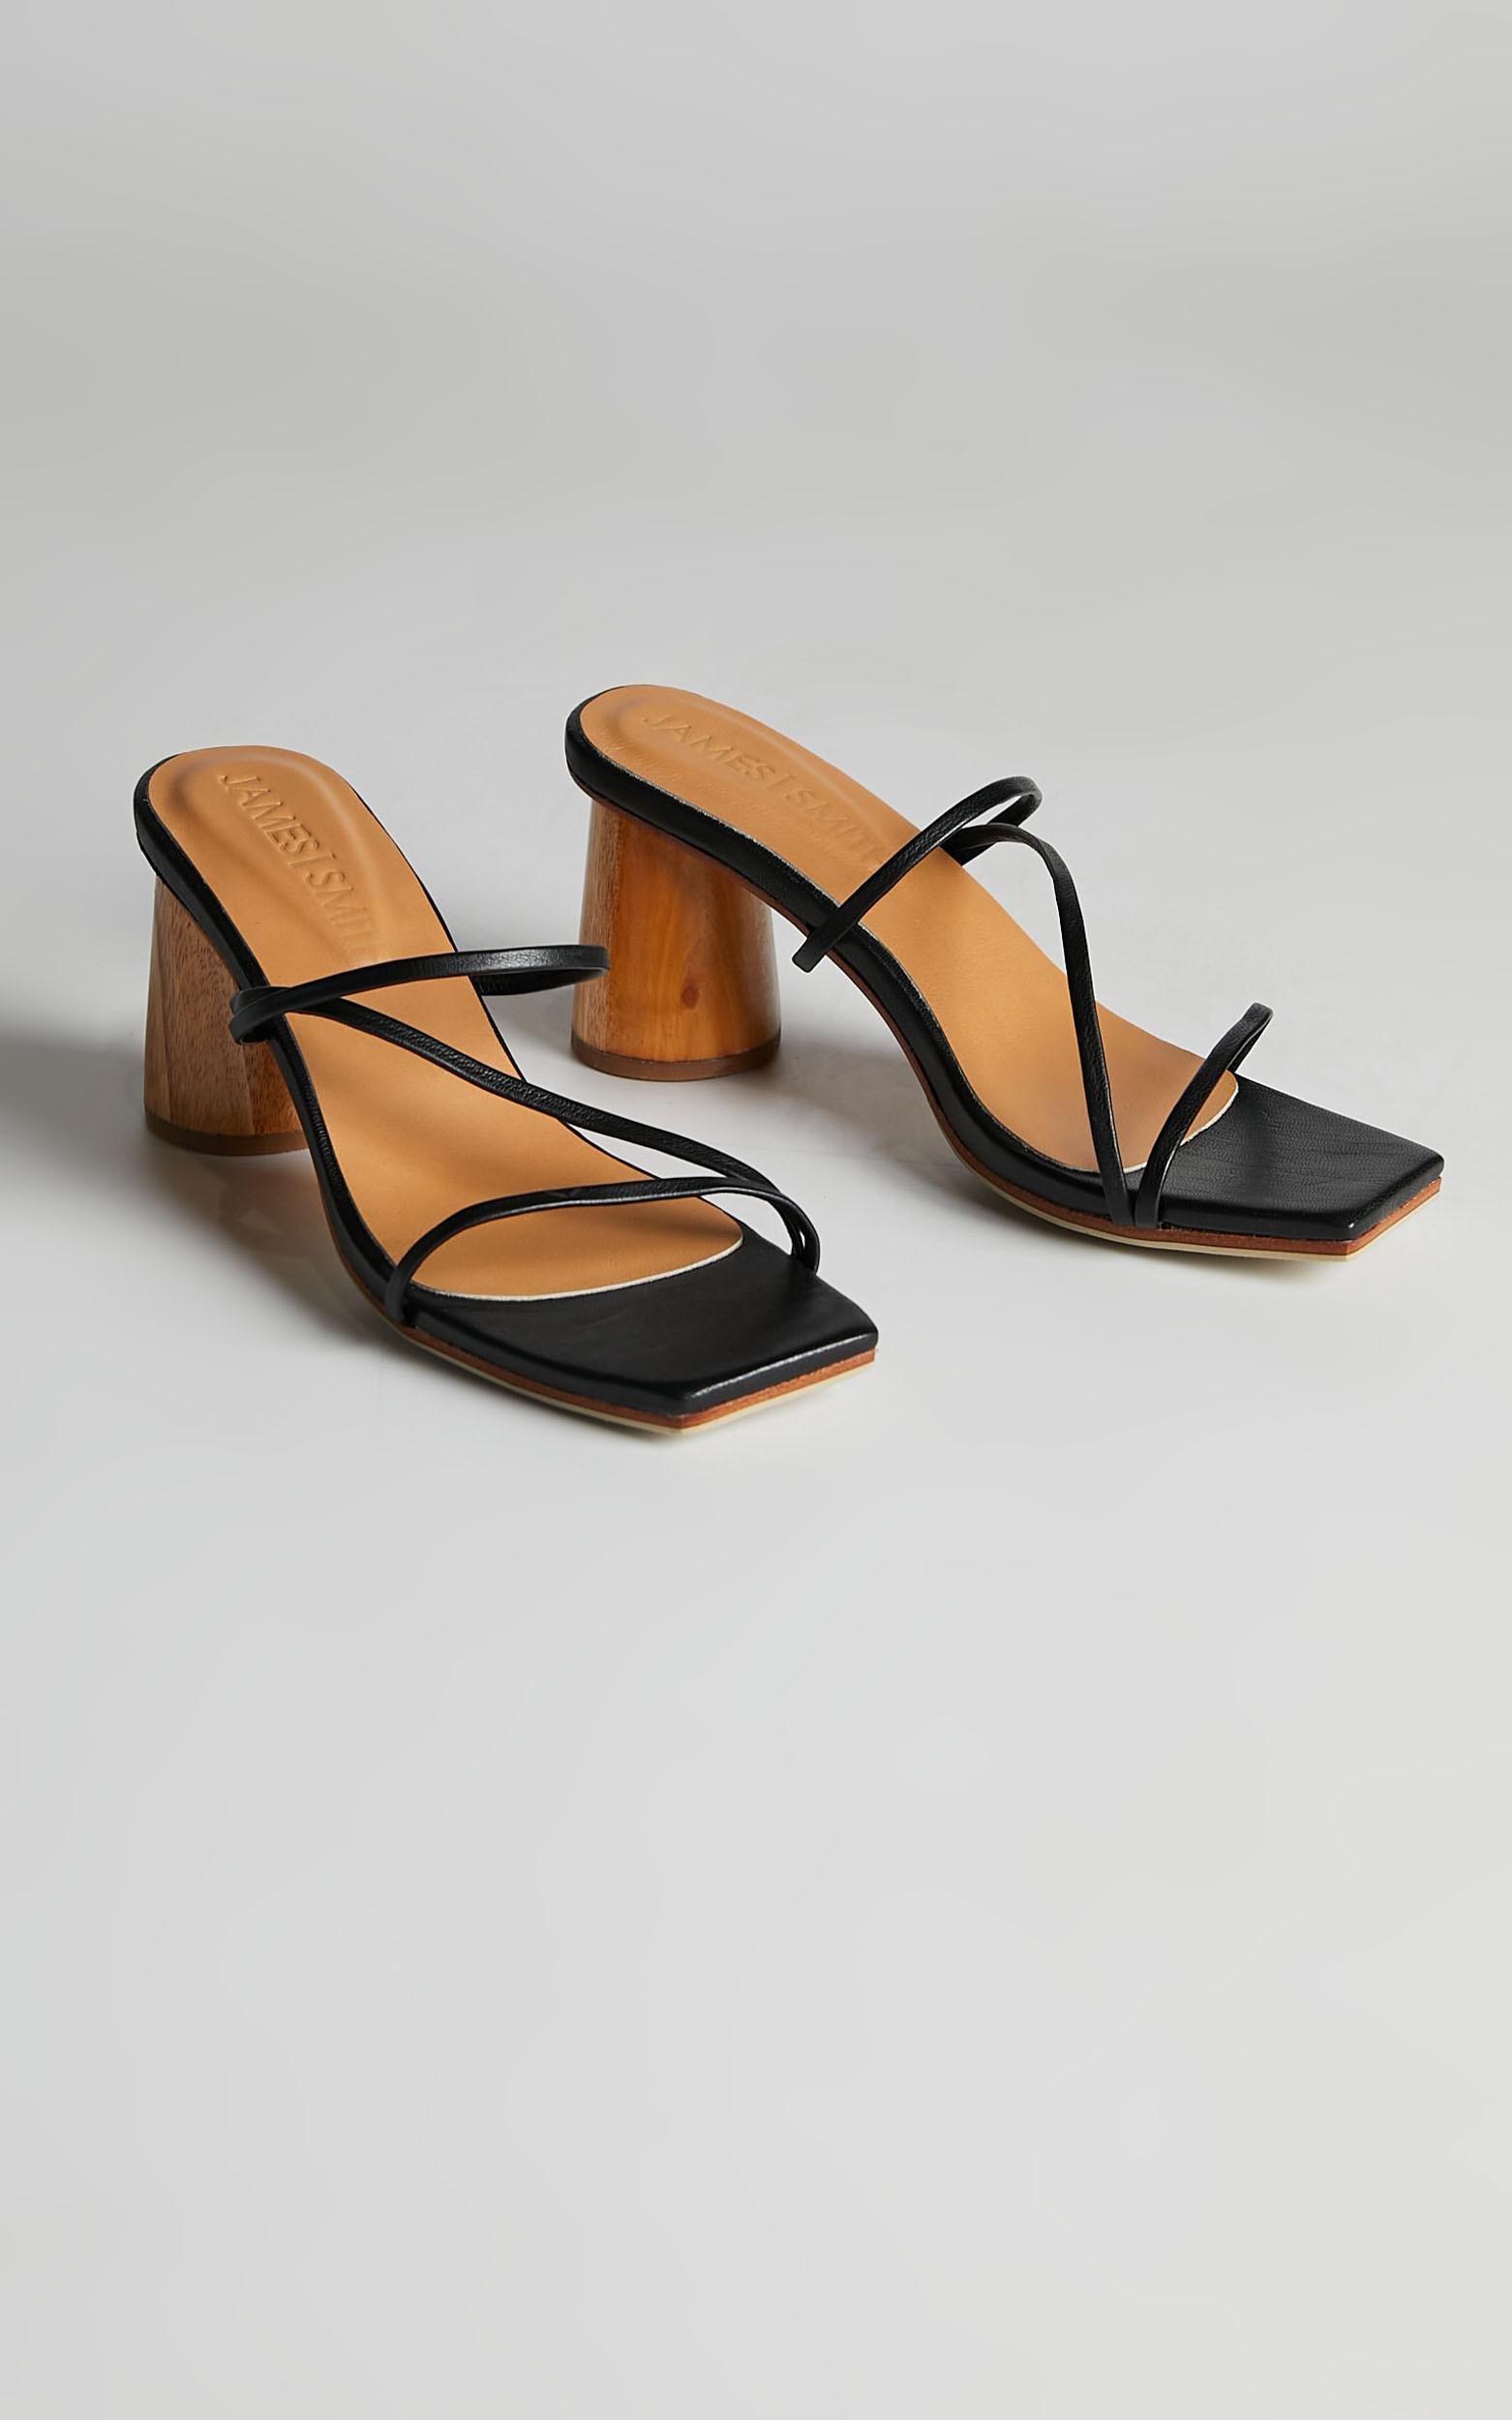 James Smith - Amore Mio Strappy Sandal in Black - 05, BLK1, hi-res image number null